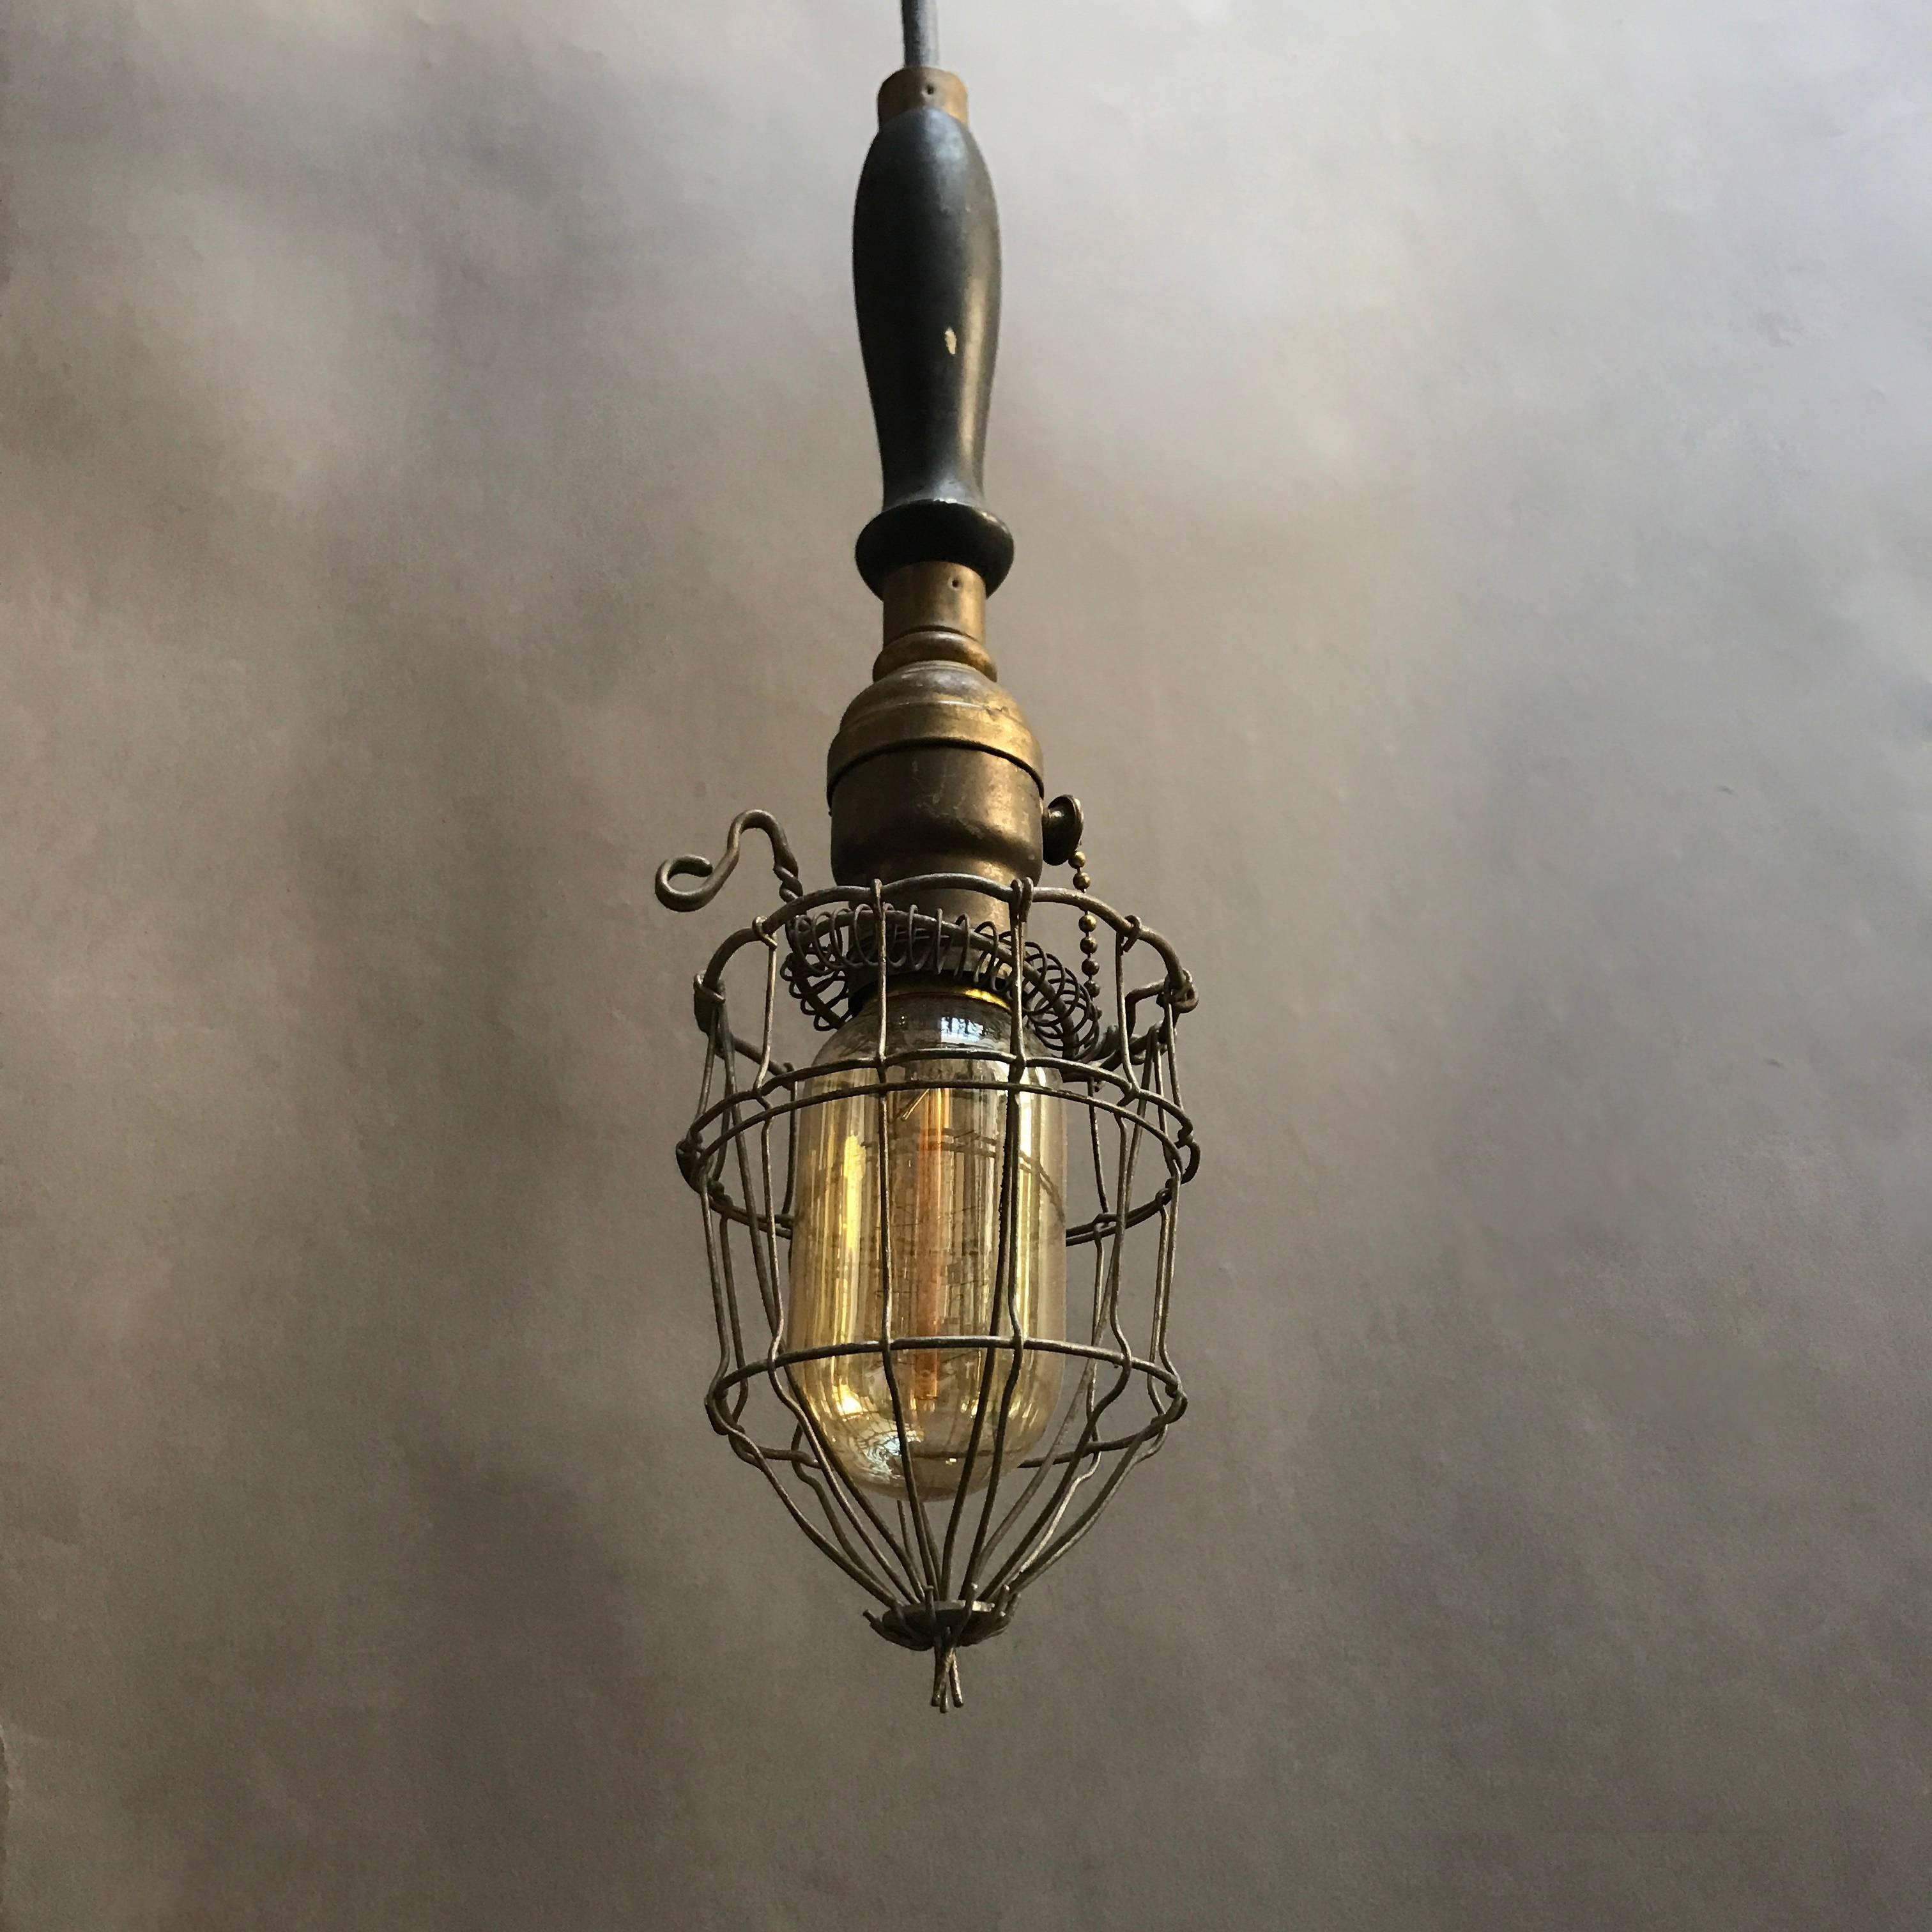 20th Century Industrial Caged Utility Light Pendant with Wood Handle